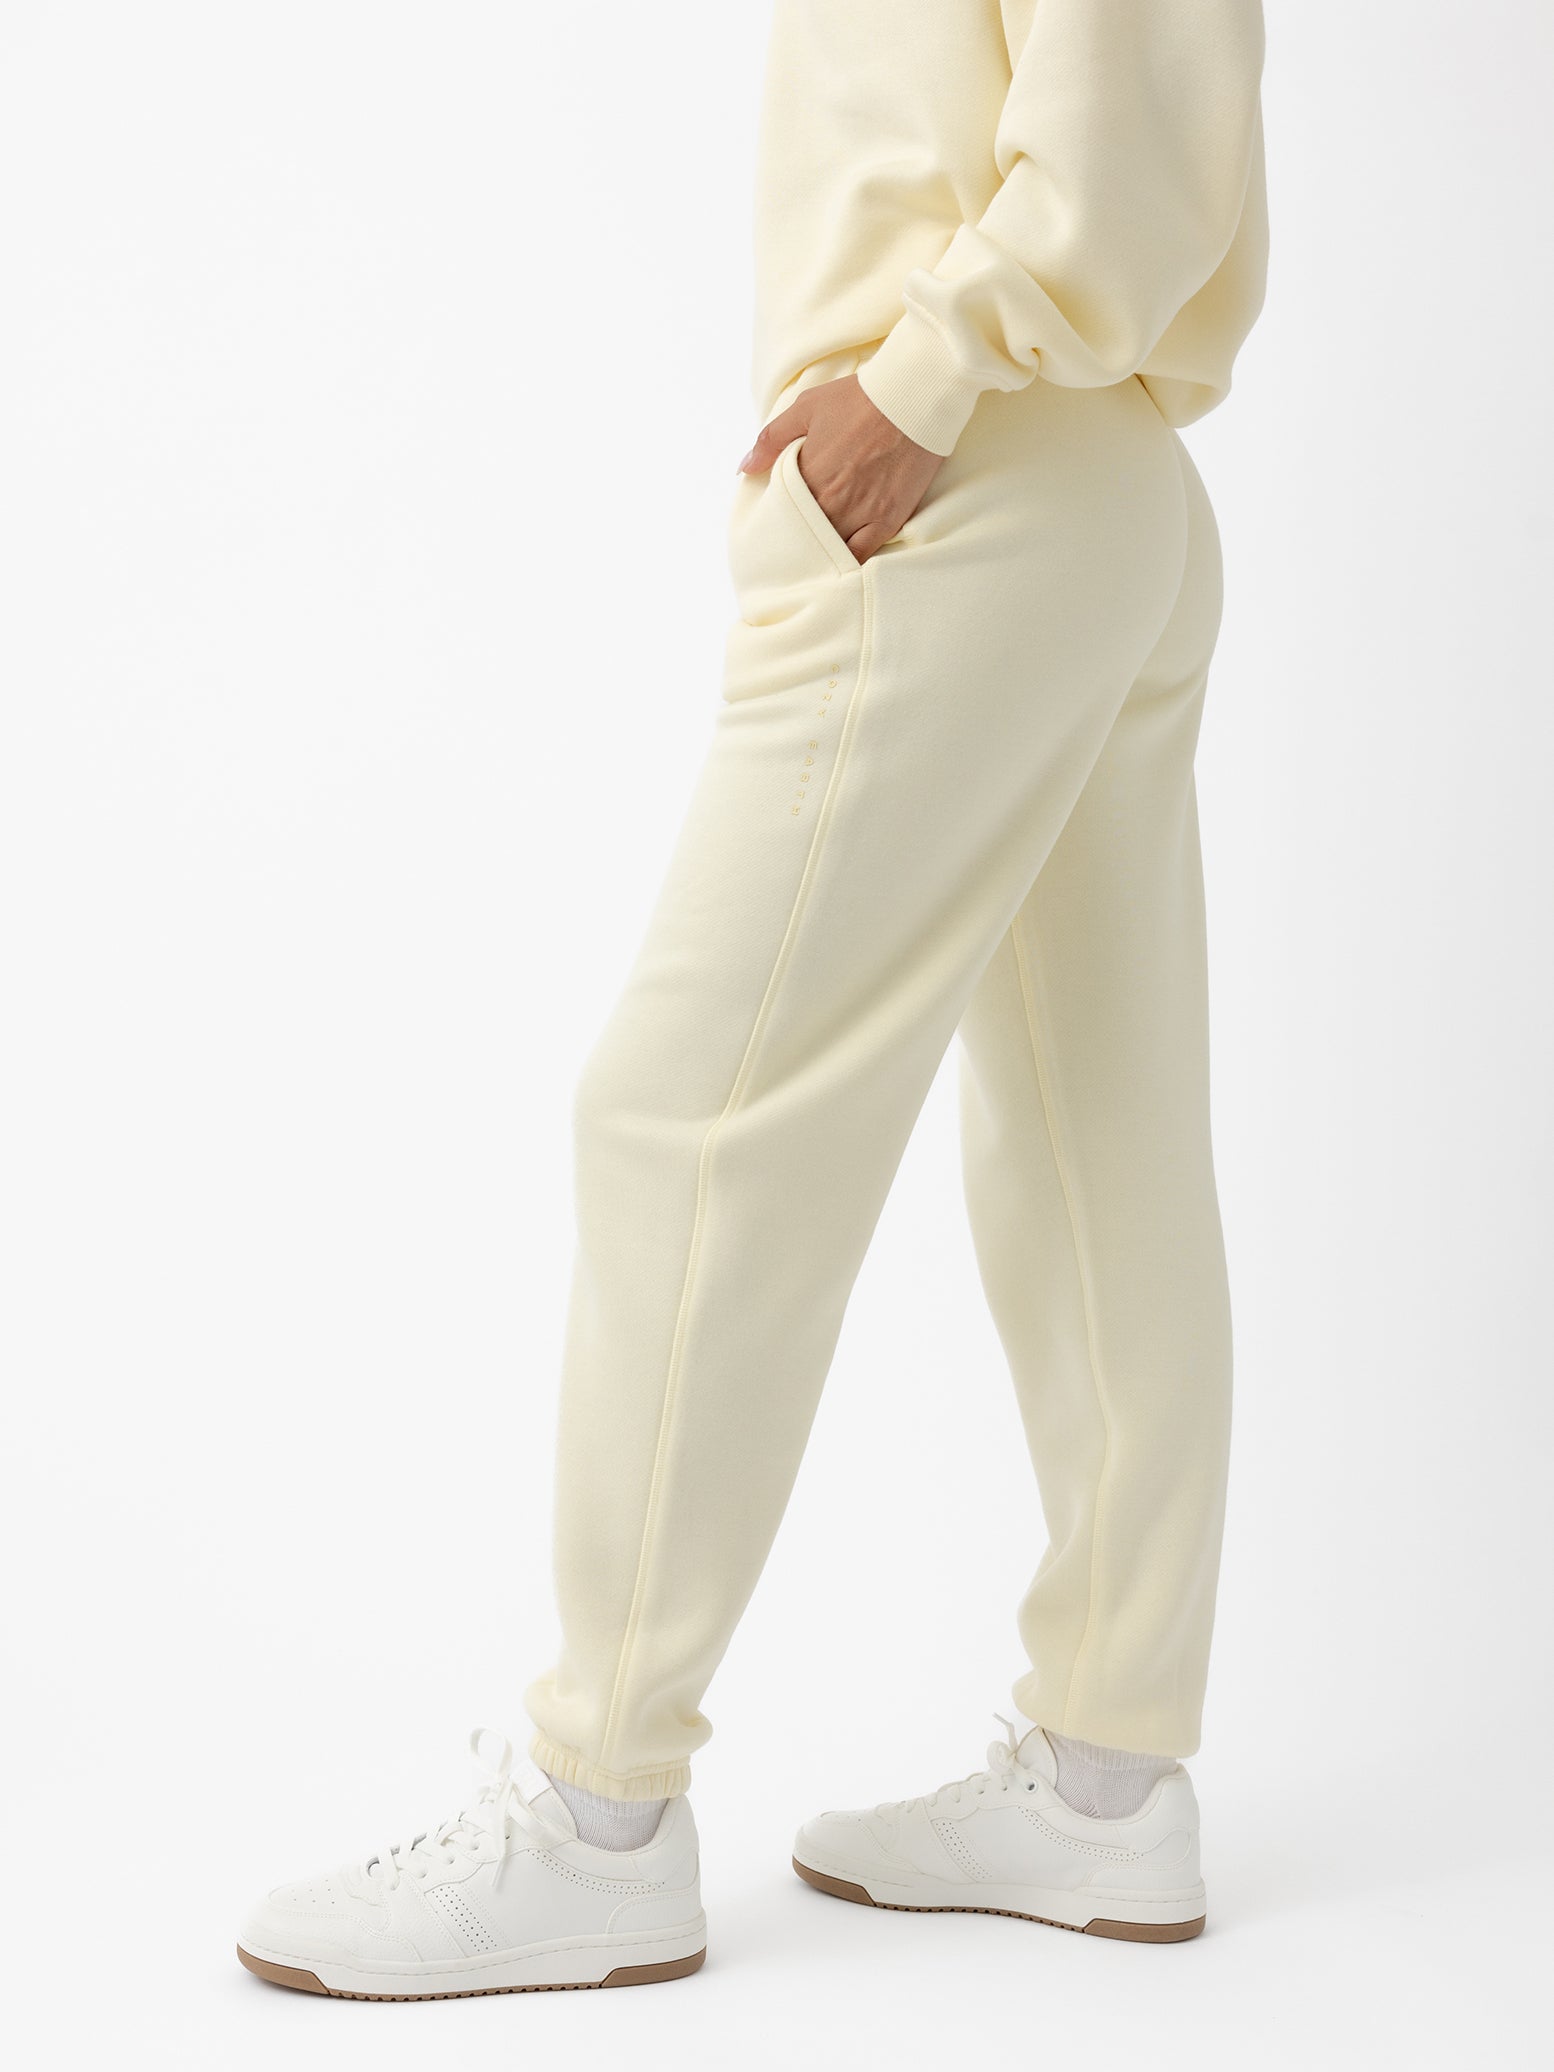 Lemonade CityScape Joggers. The Joggers are being worn by a female model. The photo is taken from the waist down with the models hand by the pocket of the joggers. The back ground is white. 